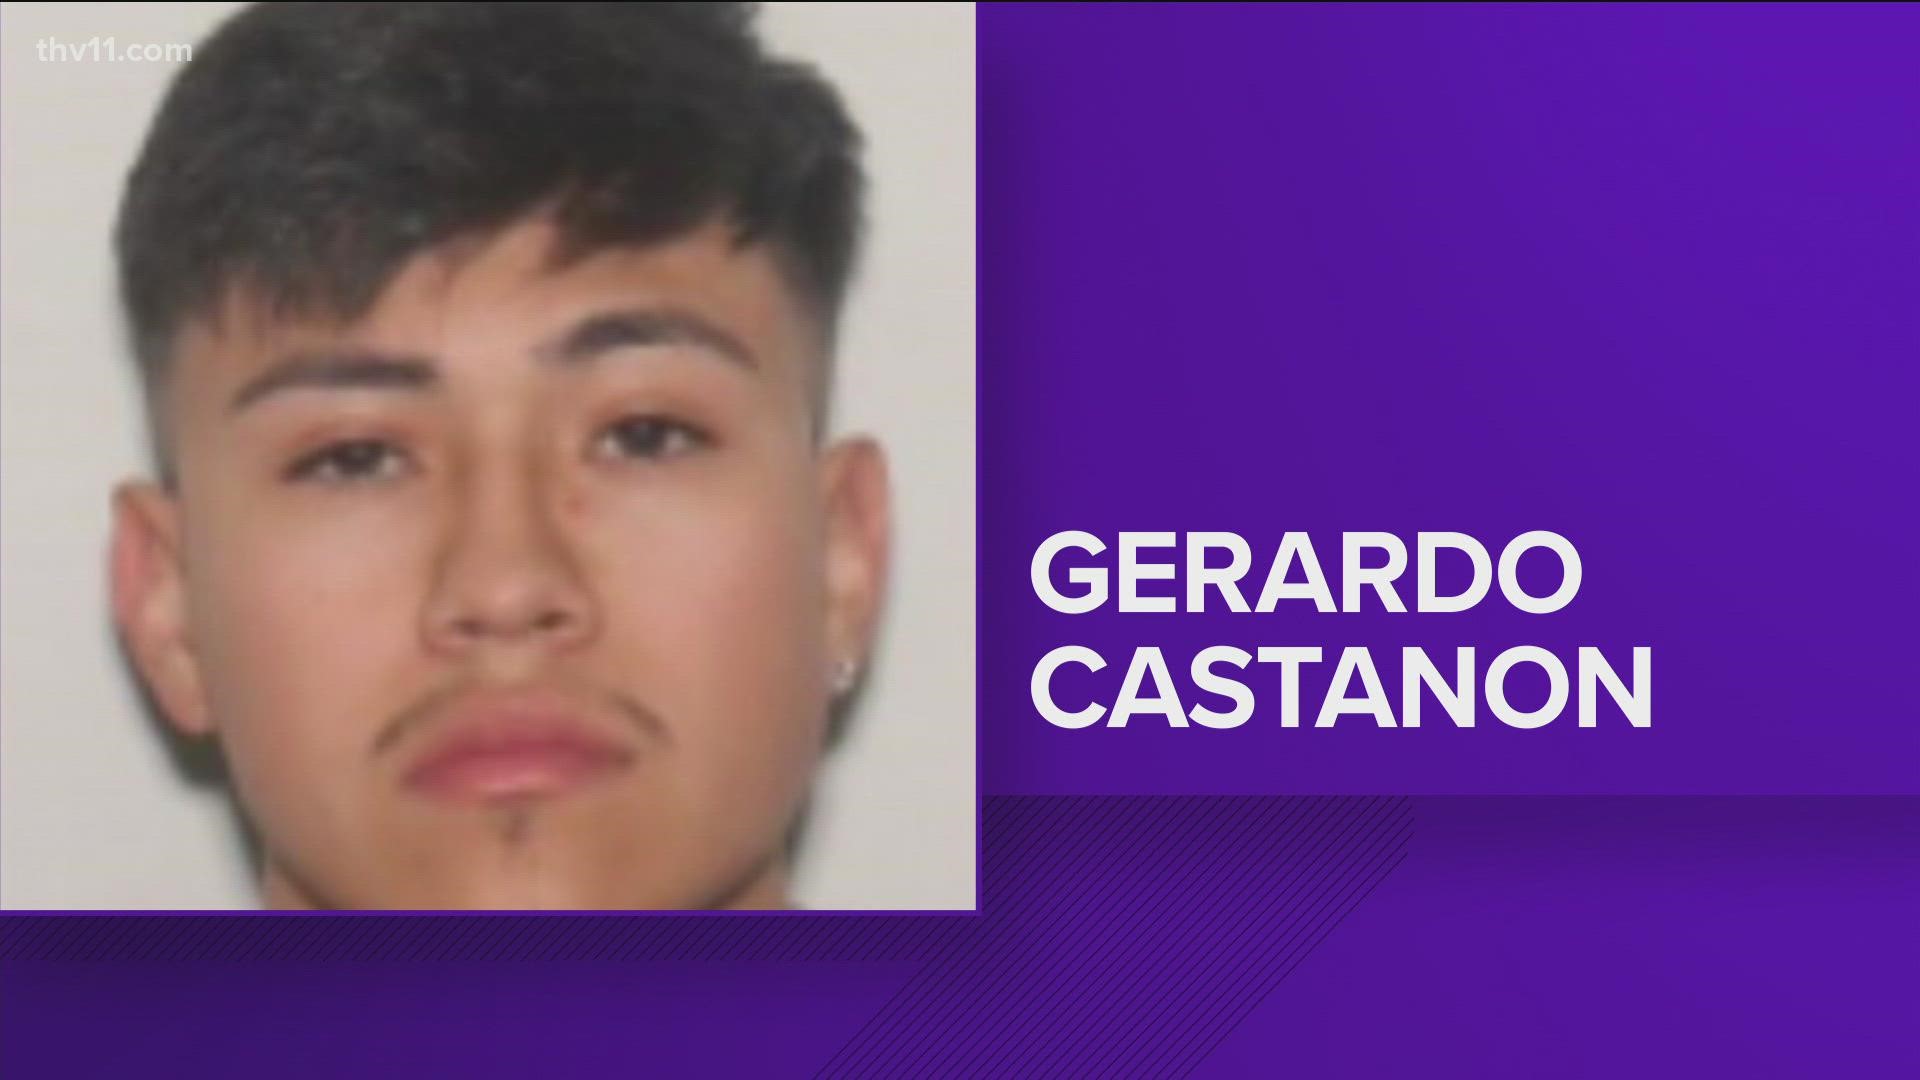 Authorities are asking for the public's help in locating Gerardo Castanon, who they believe to be connected to a homicide that happened on Mabelvale Pike.